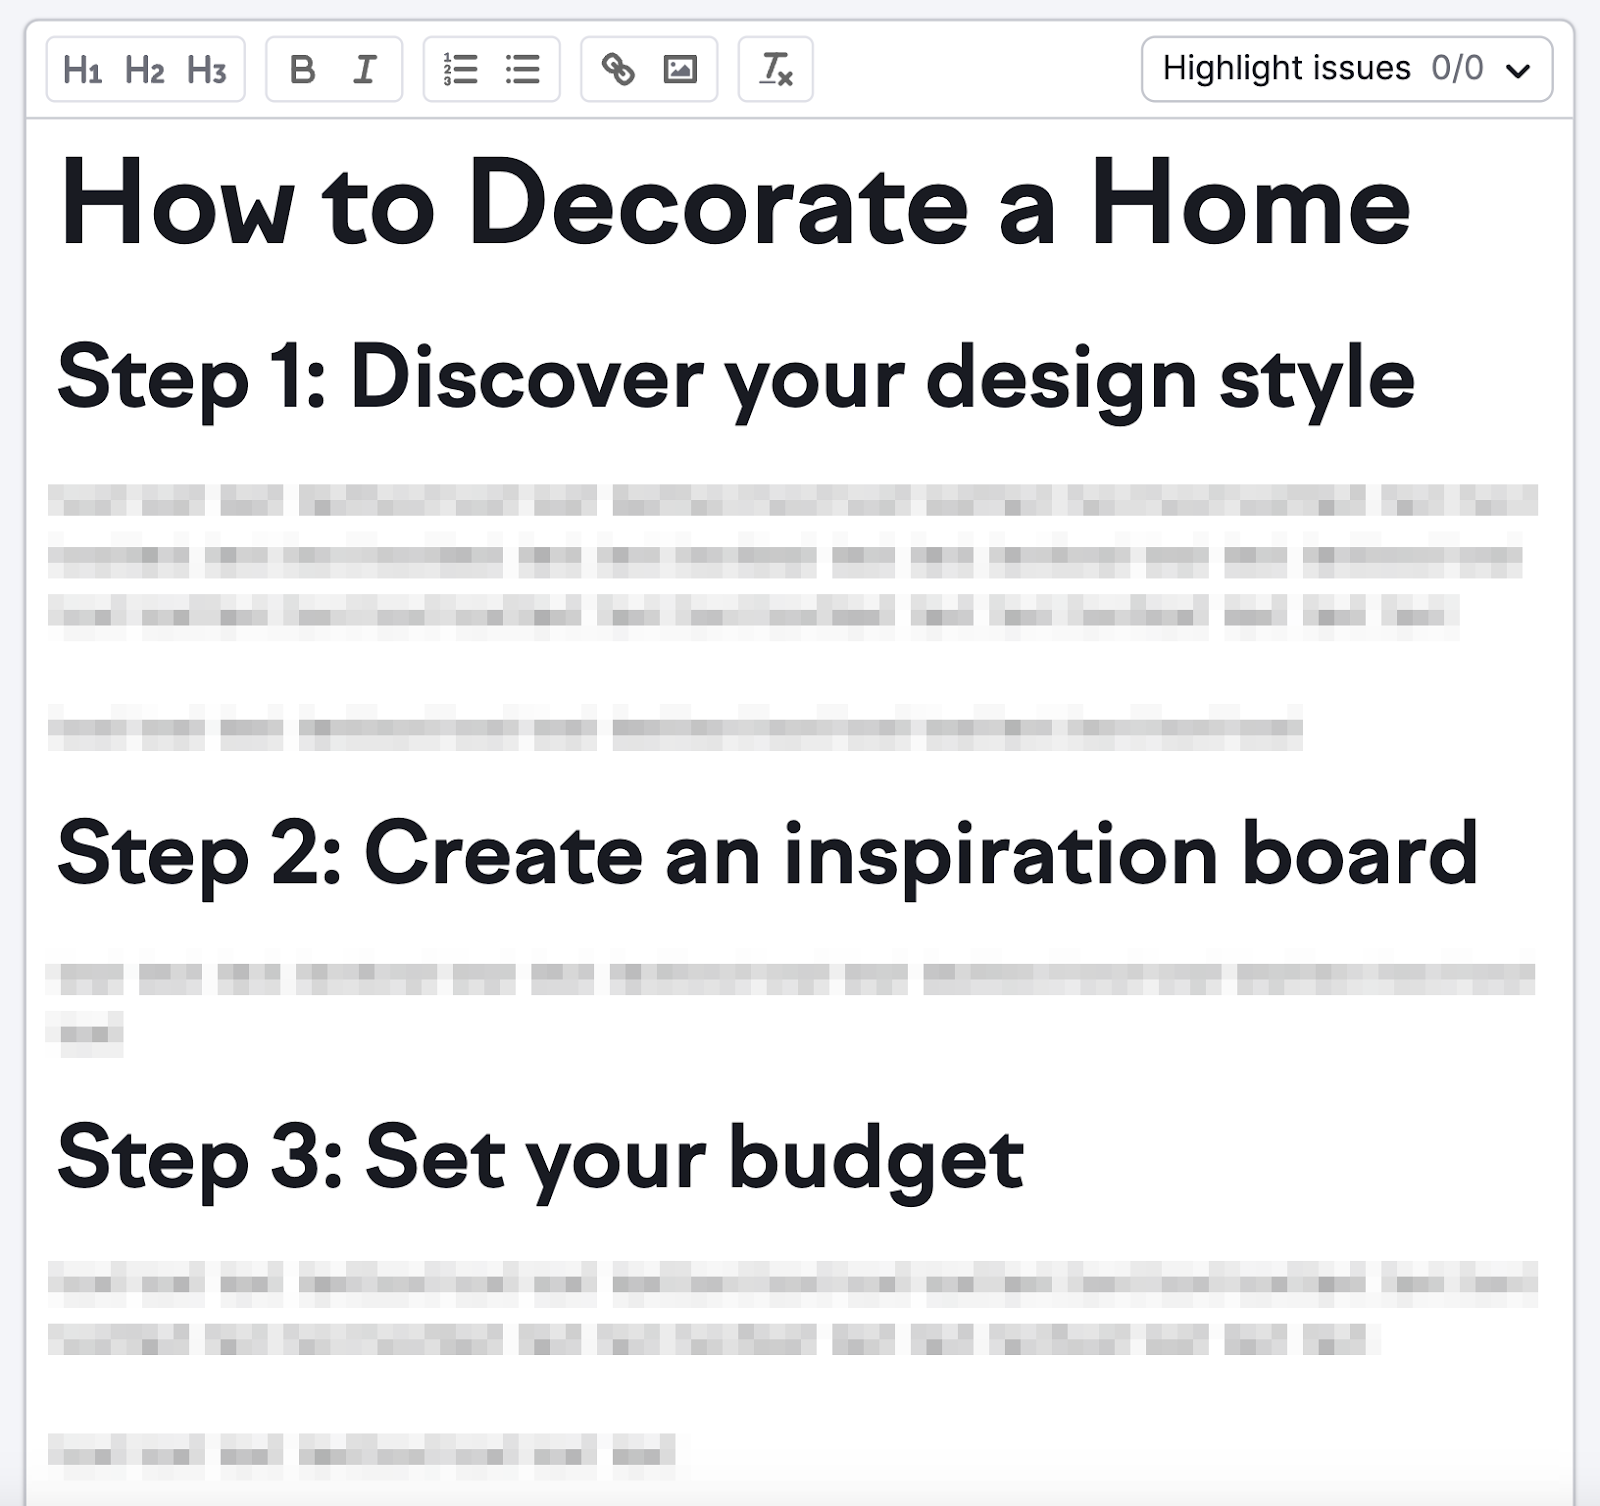 An step-by-step H2s outline in an "How to Decorate a Home" article